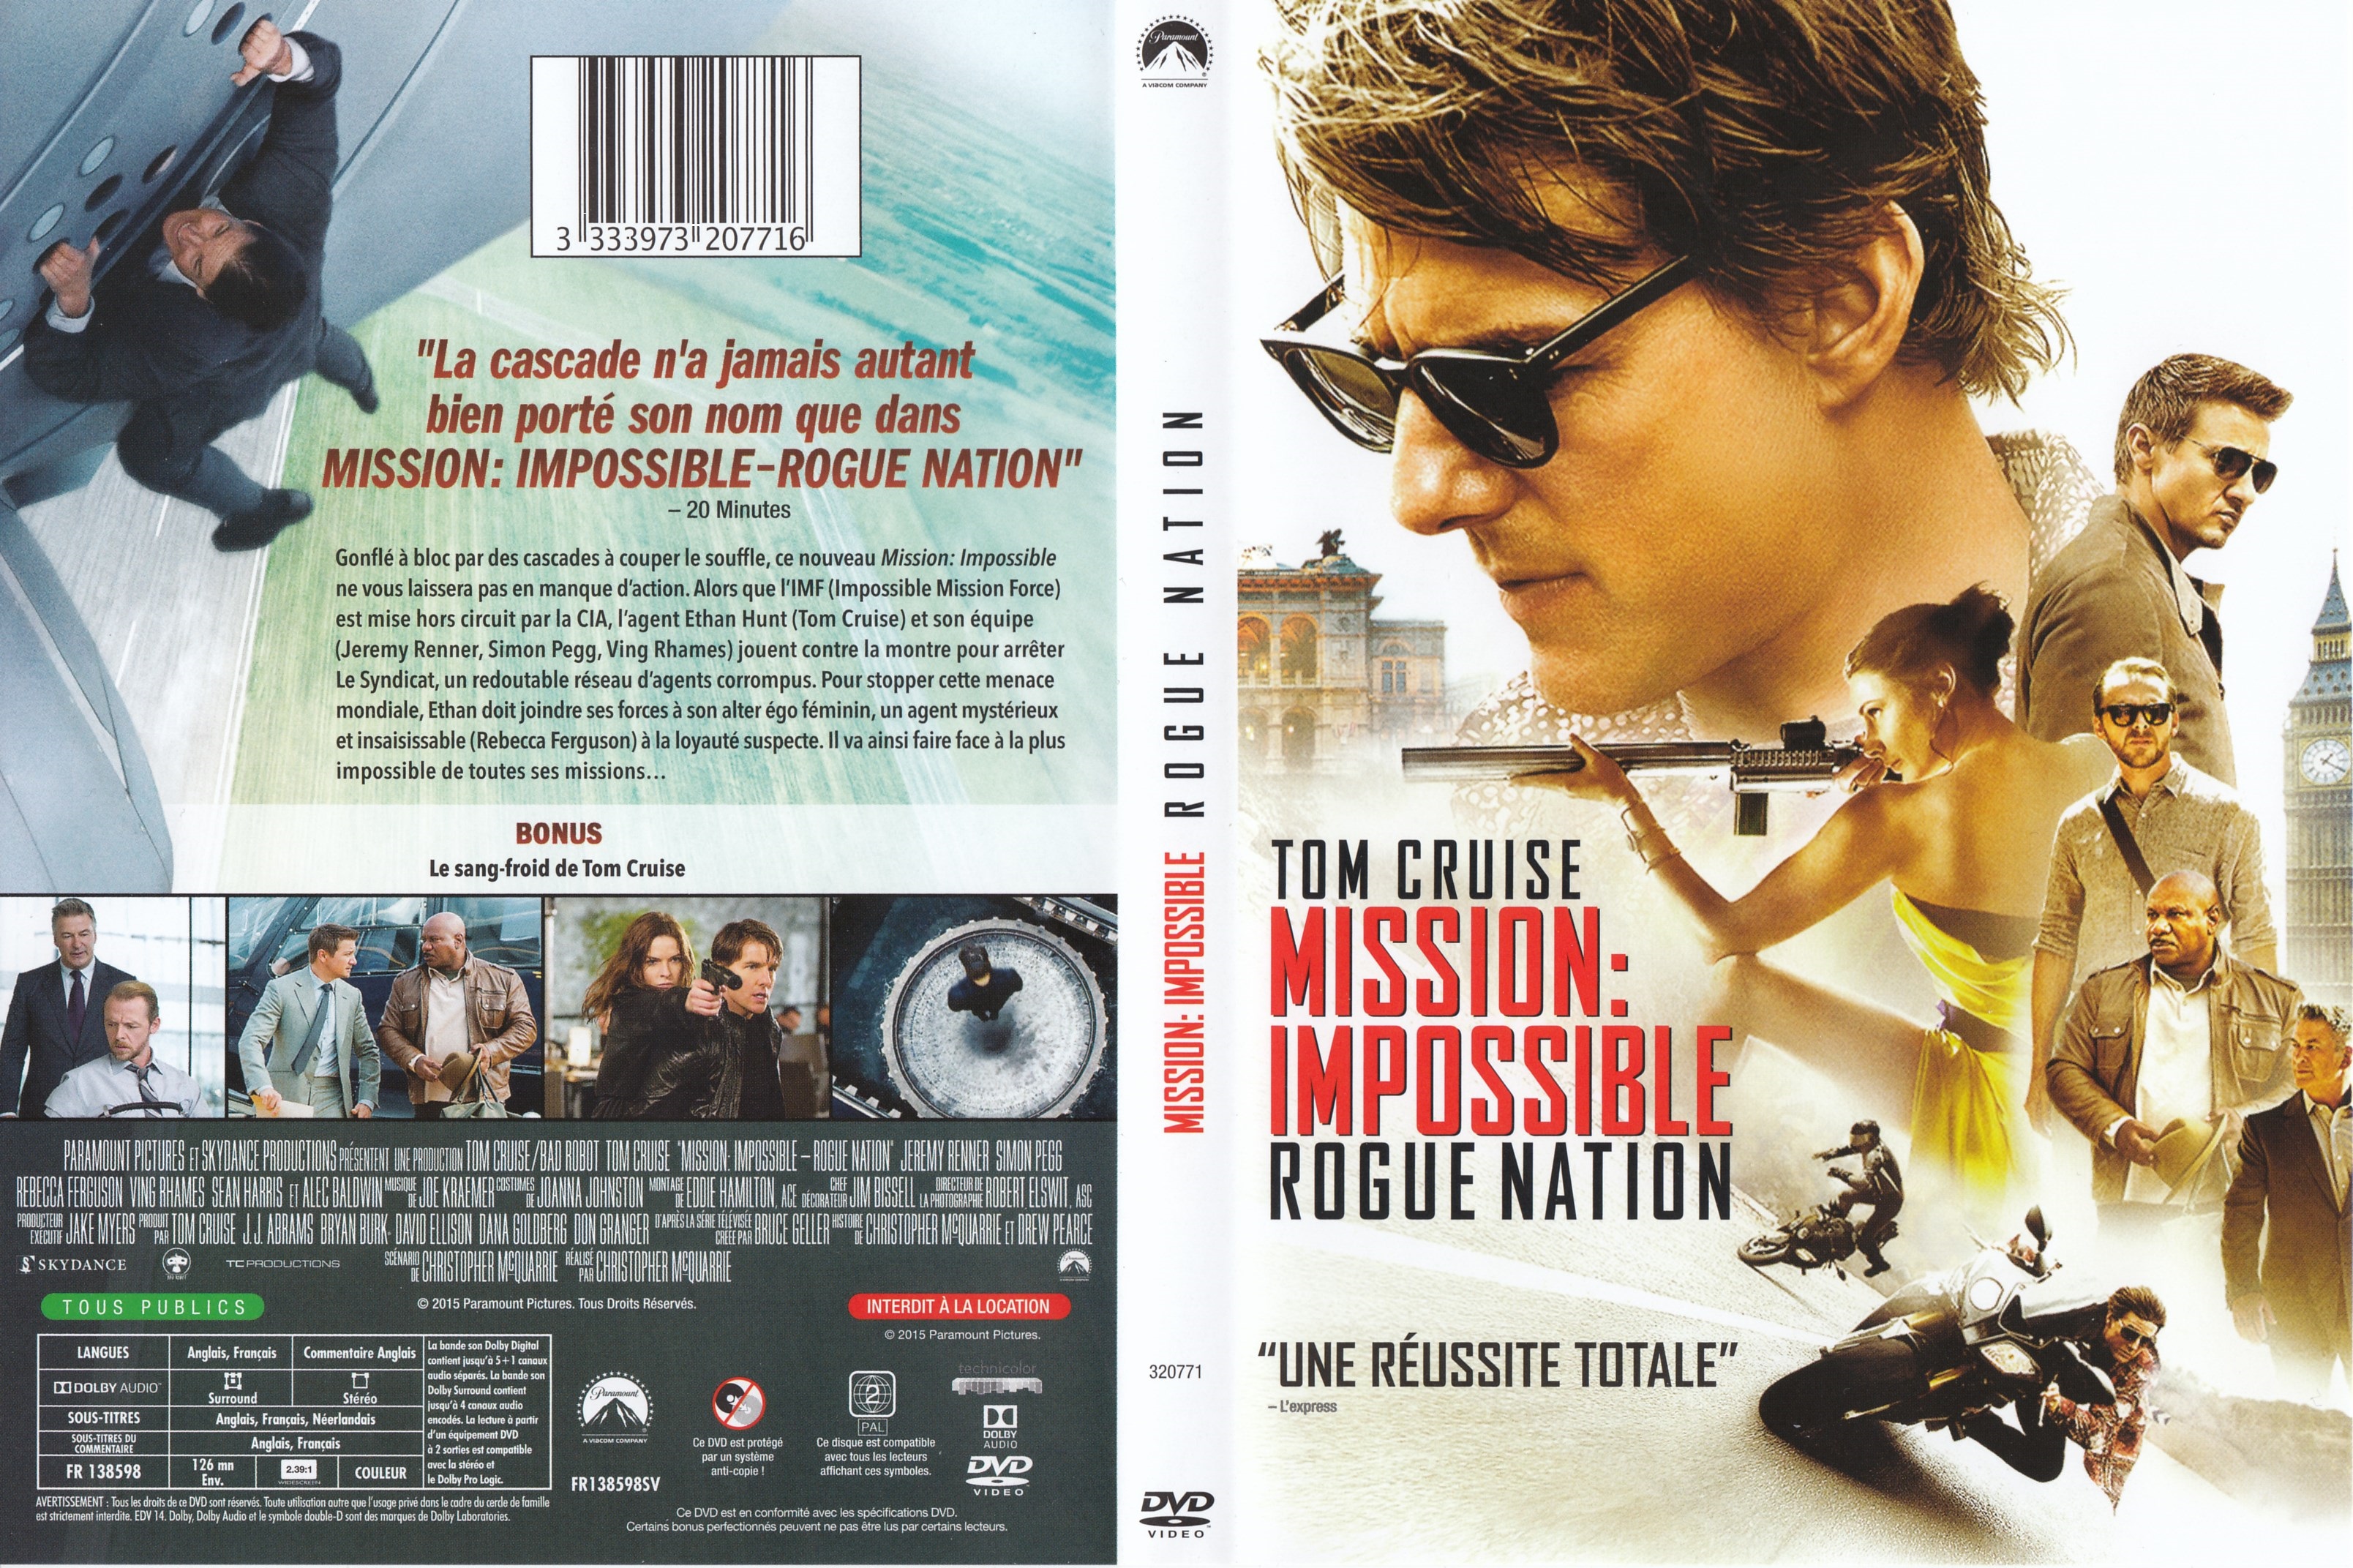 Jaquette DVD Mission : Impossible Rogue Nation